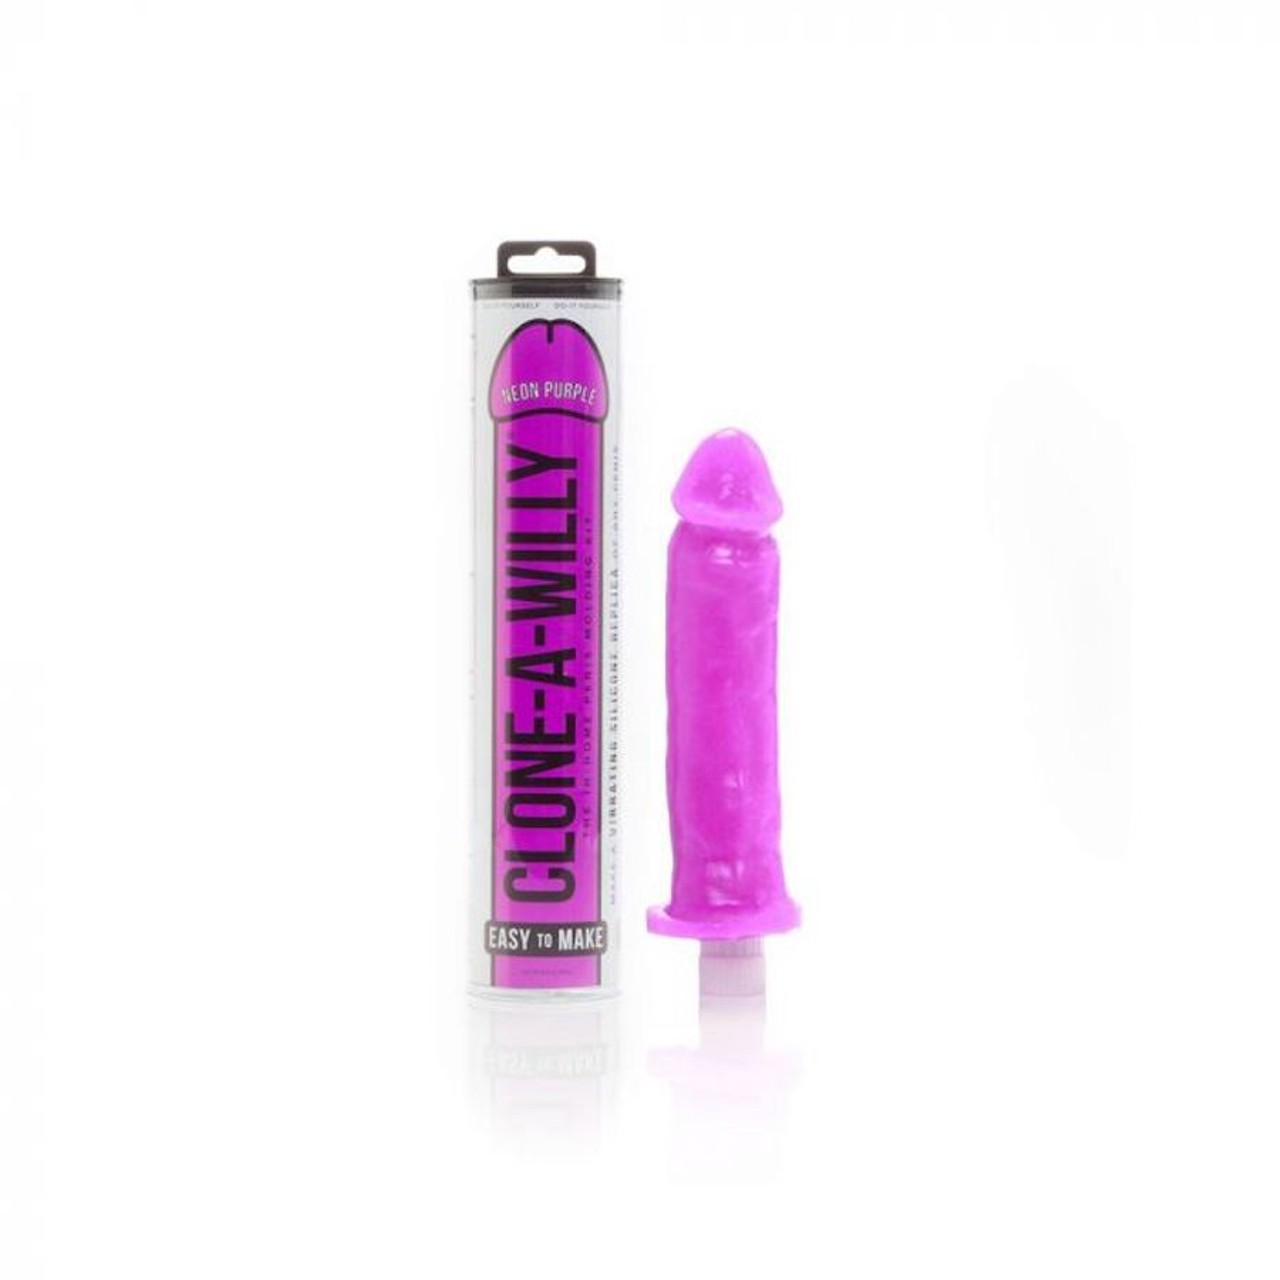 For the person who misses a very specific phallus
Clone-A-Willy Vibrating Silicone Molding Kit, $49.95
Spectrum Boutique, 0nline only, spectrumboutique.com
Penises are like snowflakes, and each one is totally unique. From veins, creases, and curvature, it's likely that everyone who likes penises has a favorite one, or two, or, OK, maybe three to enjoy. But if you can narrow it down to the top tip, there's the Clone-A-Willy kit, which allows you to copy your fave phallus. The medically tested DIY dildo mold kit walks you through the process of casting your own toy, which includes an optional Slimline vibrator. Clone-A-Pussy kits are also available because duh.
Photo via   spectrumboutique.com